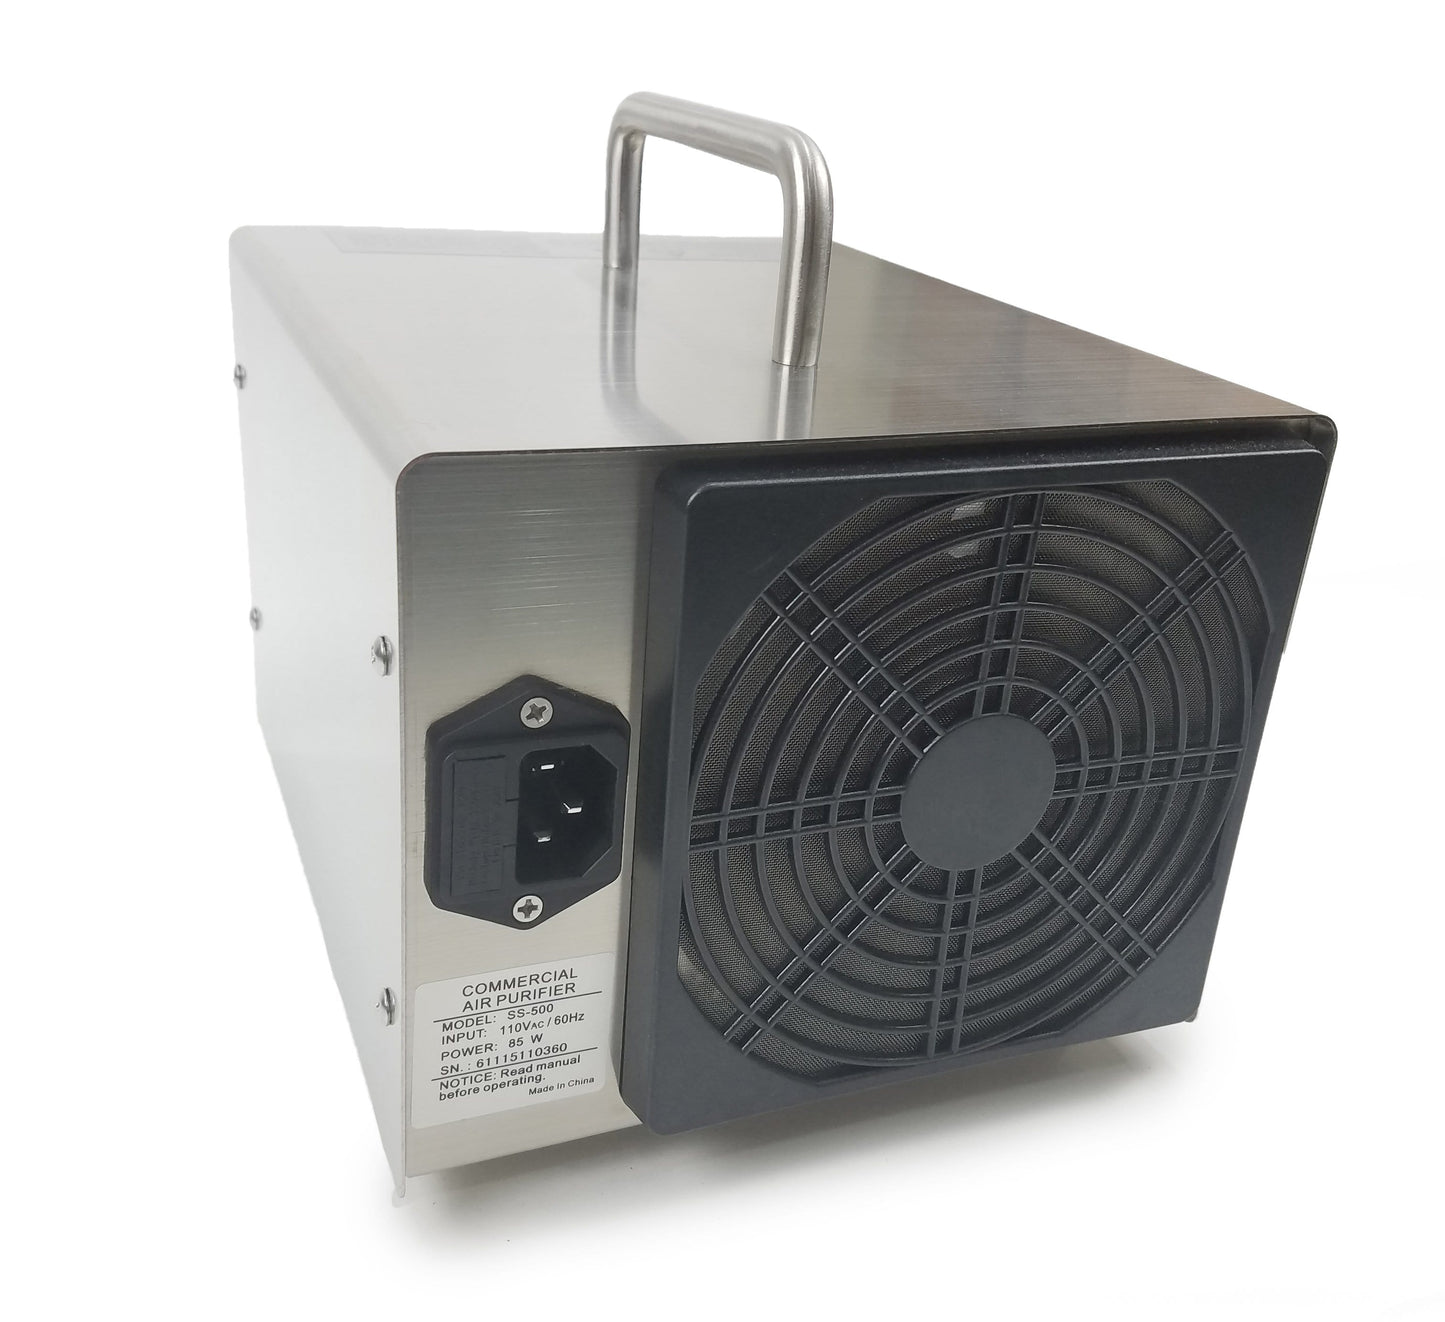 Demo Unit Stainless Steel Compact Odor Eliminating Commercial Ozone Generator by New Comfort